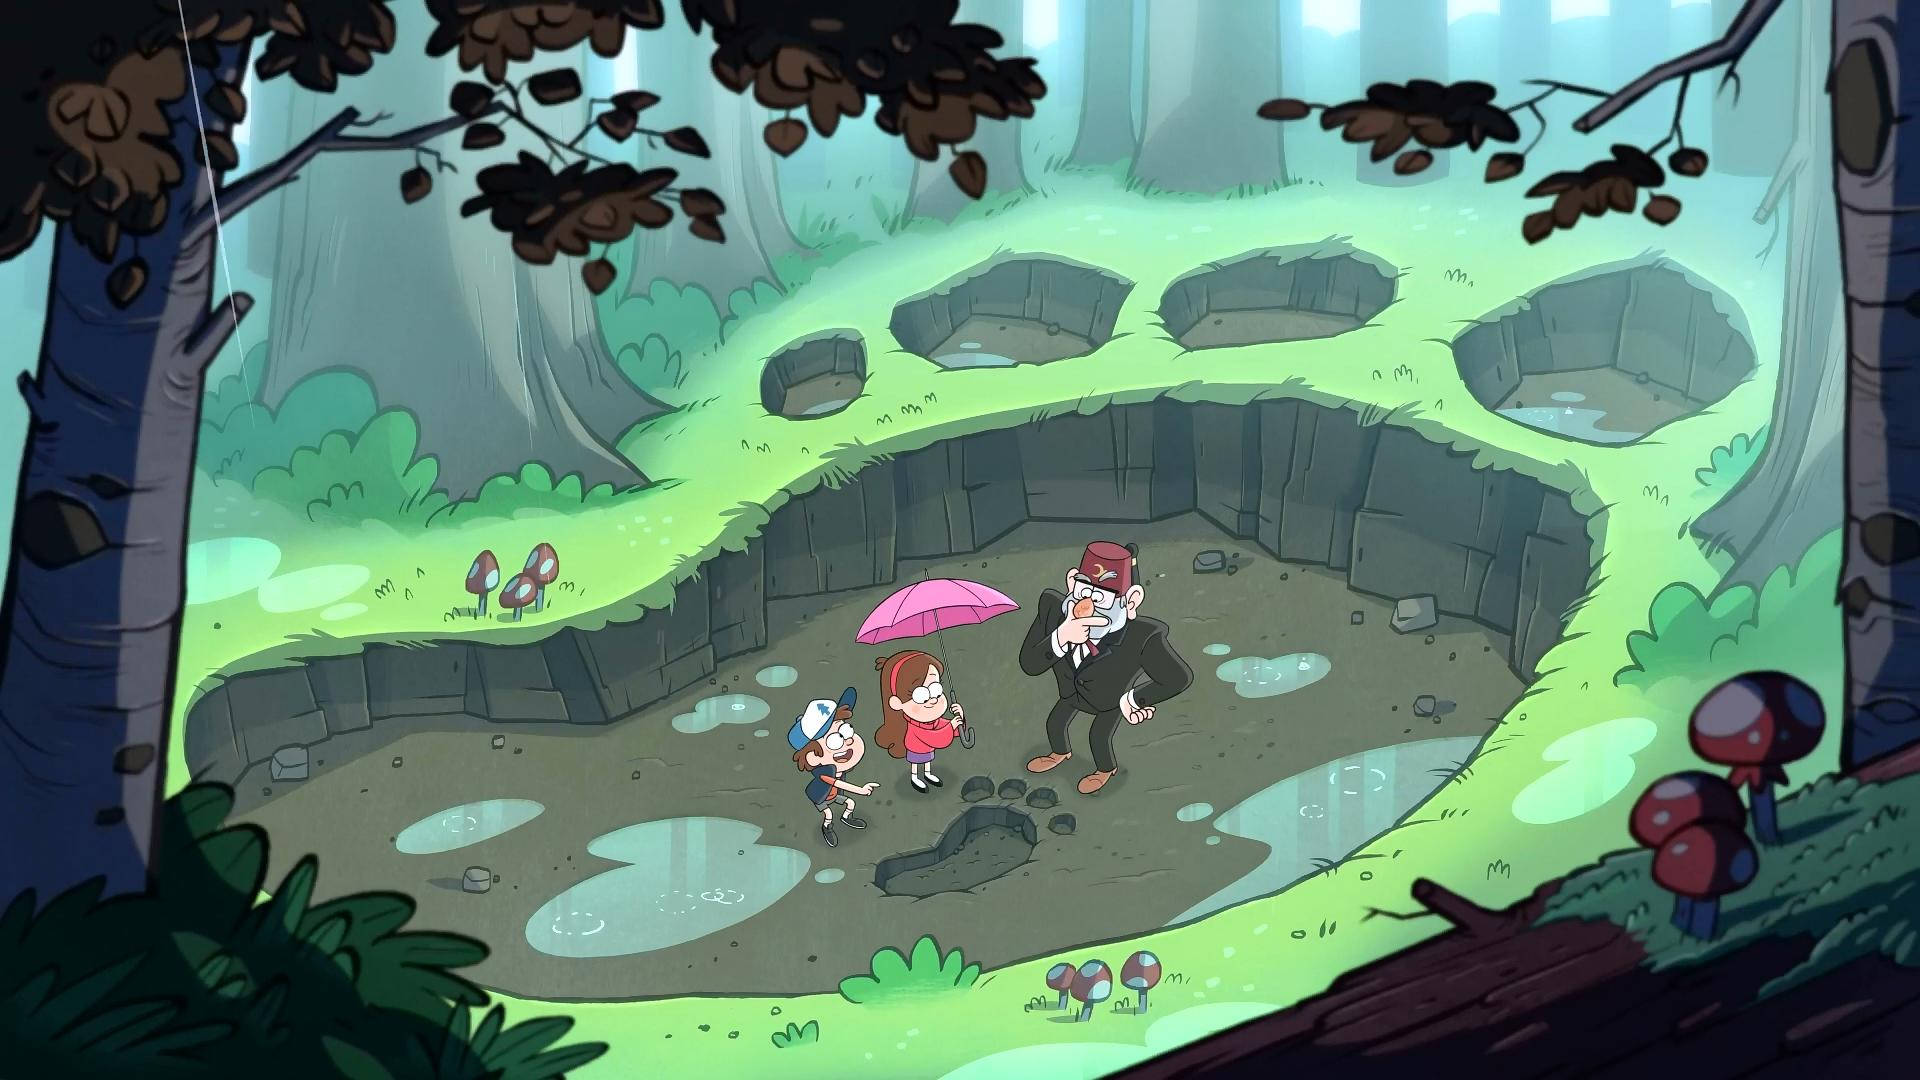 Grunkle Stan In Giant Footprint Background